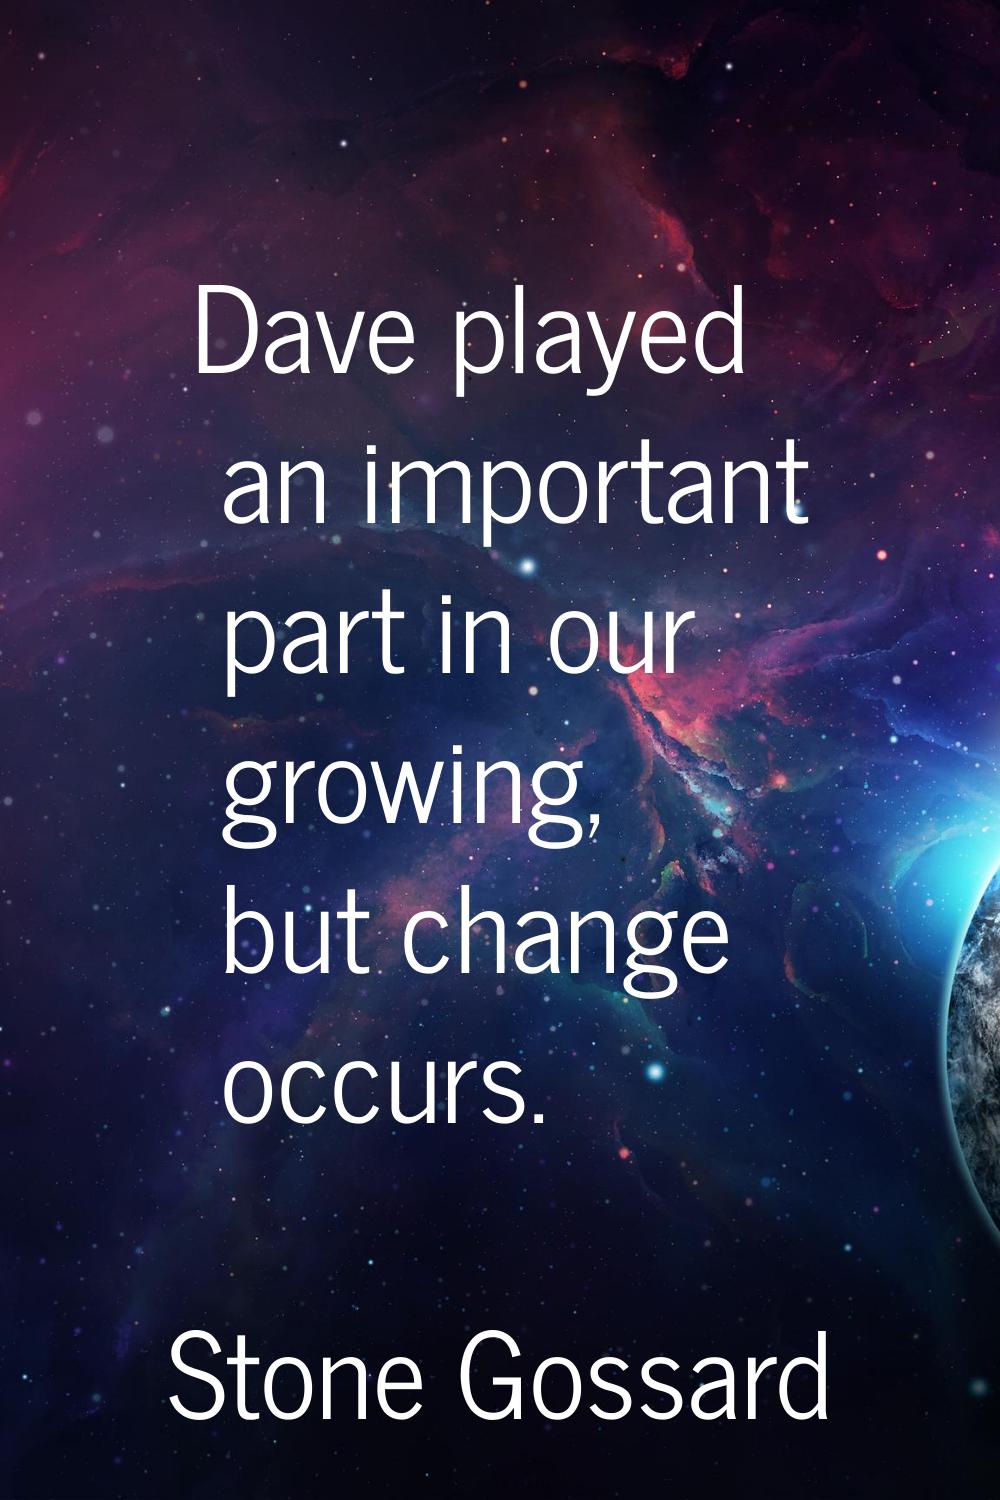 Dave played an important part in our growing, but change occurs.